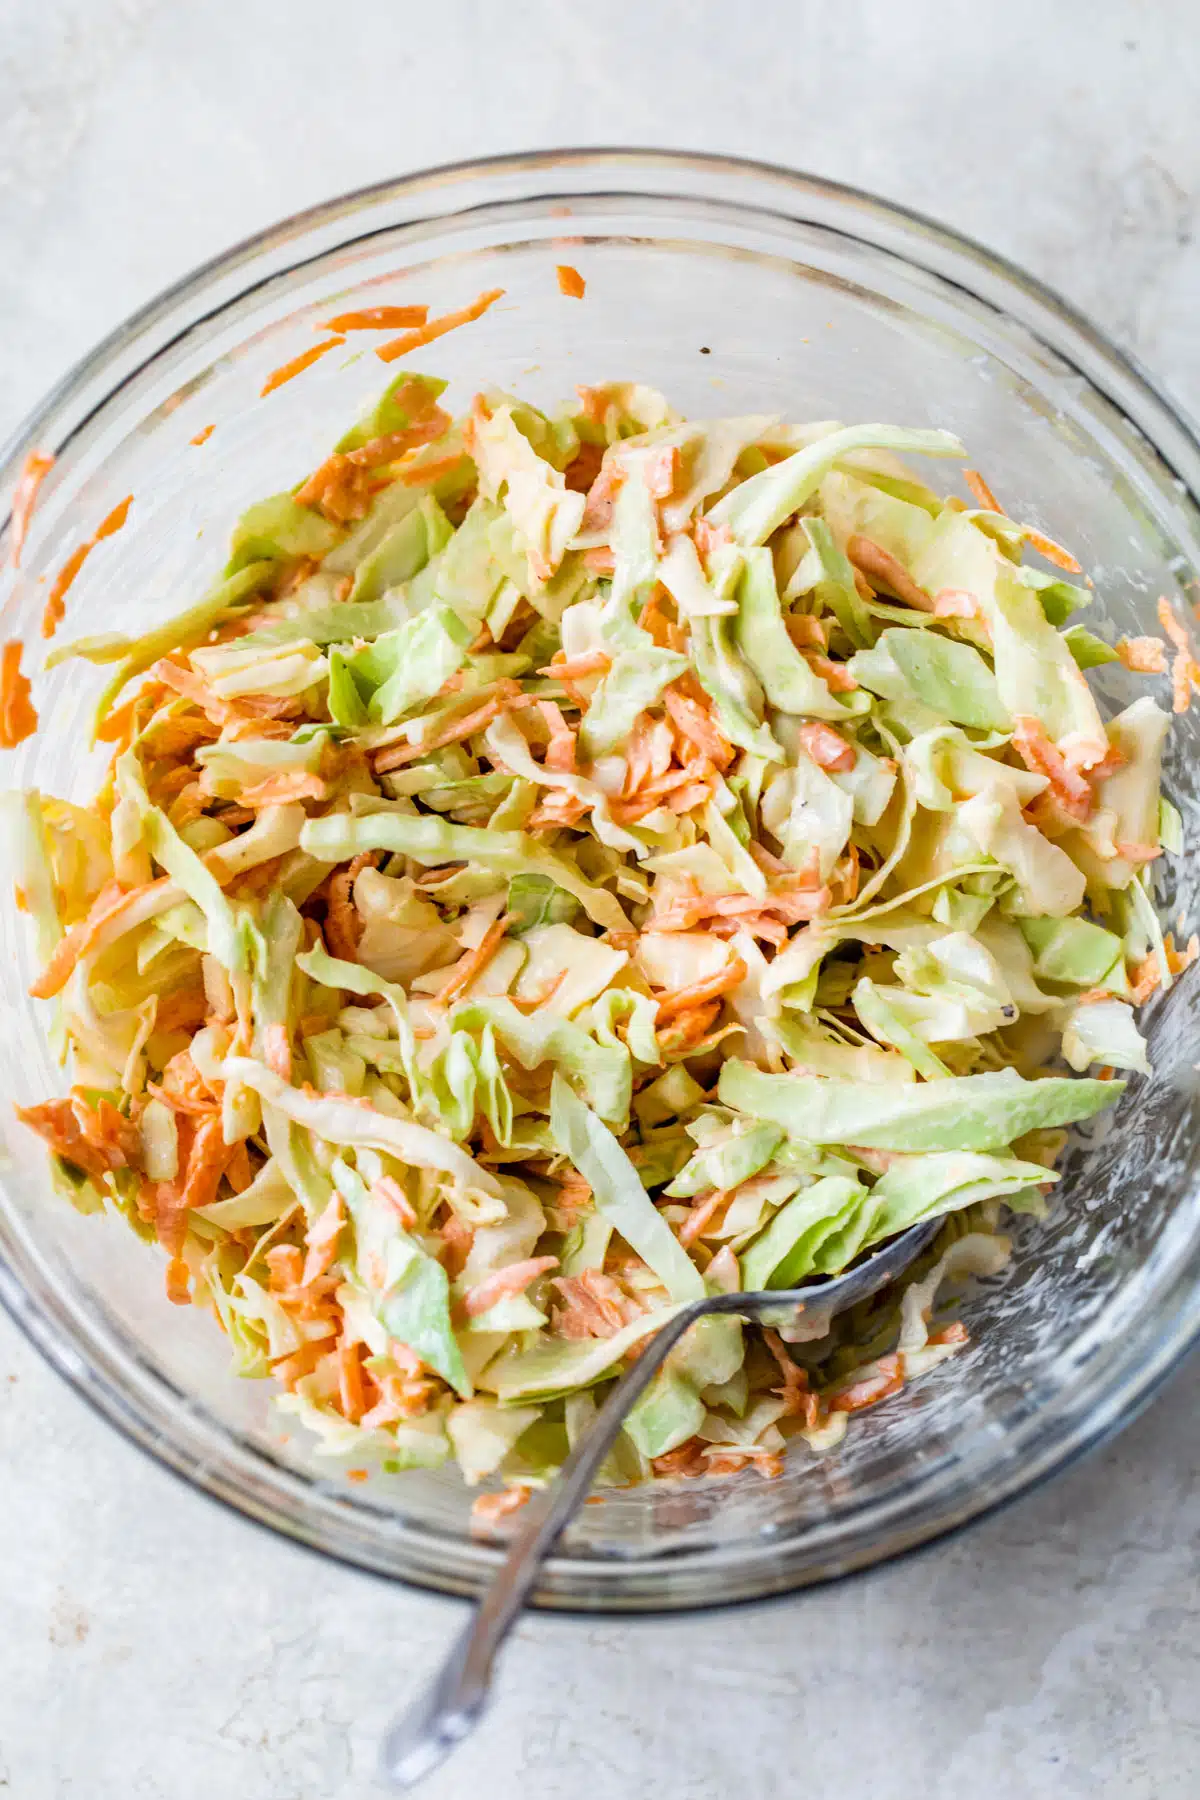 large glass bowl with coleslaw